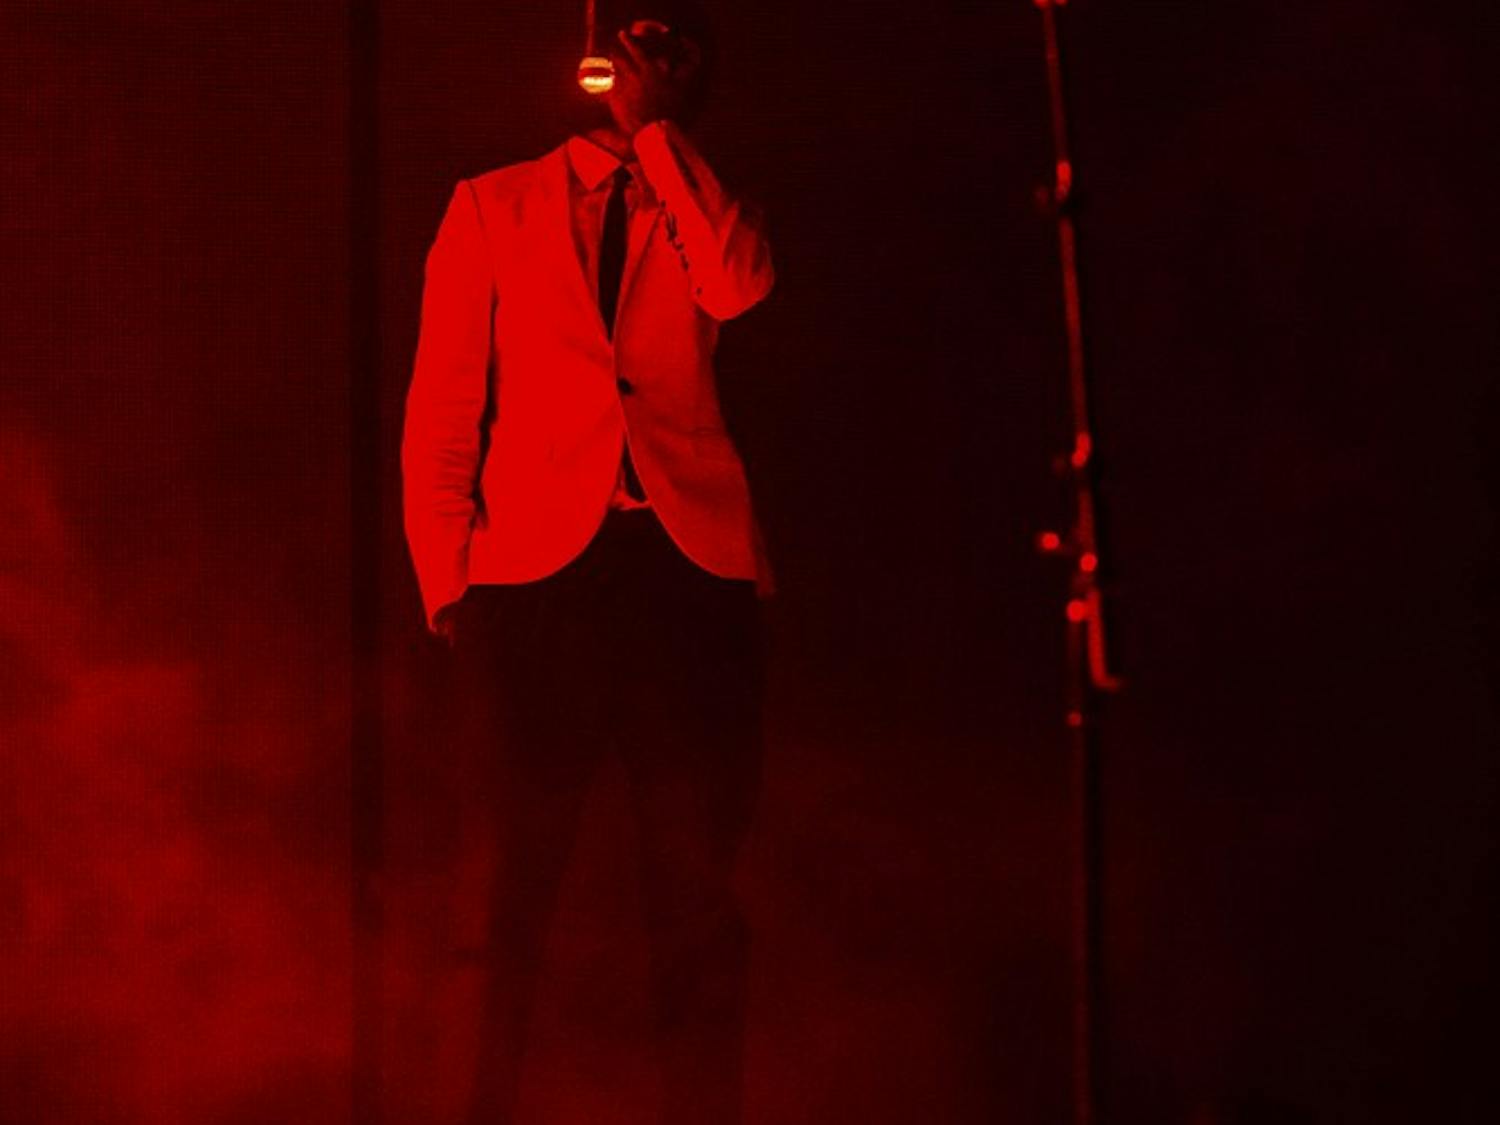 Twenty Øne Piløts, the Grammy winning alternative rock duo made up of Tyler Joseph and Josh Dunn, performed at the Greensboro Coliseum Complex on Saturday as part of the Emøtiønal Røadshow tour. 